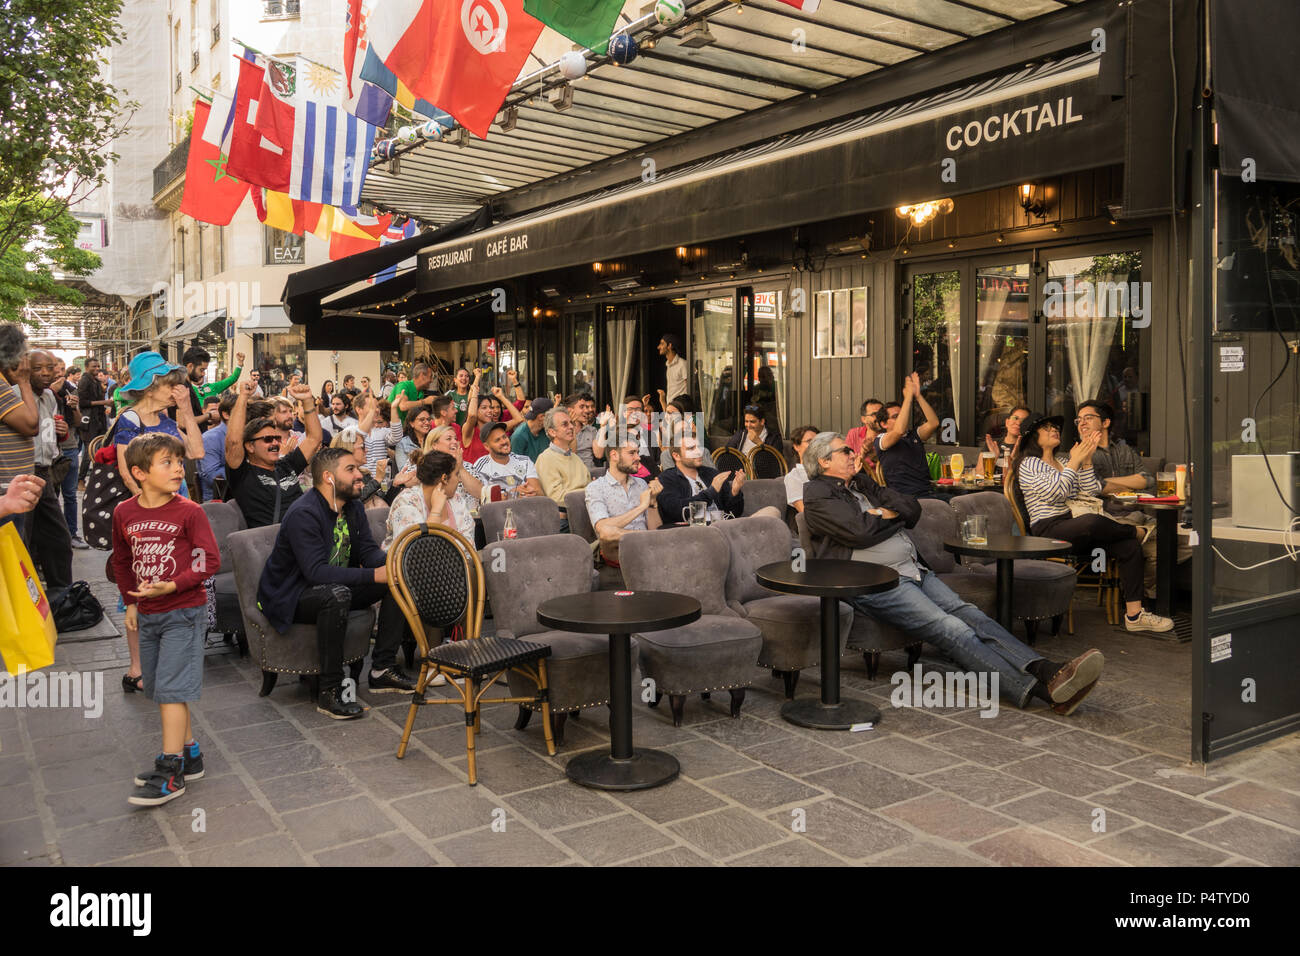 PARIS, FRANCE - 23 JUN 2018: People and supporters watch, the 2018 football world cup, at a coffee shop terrace in Paris Stock Photo